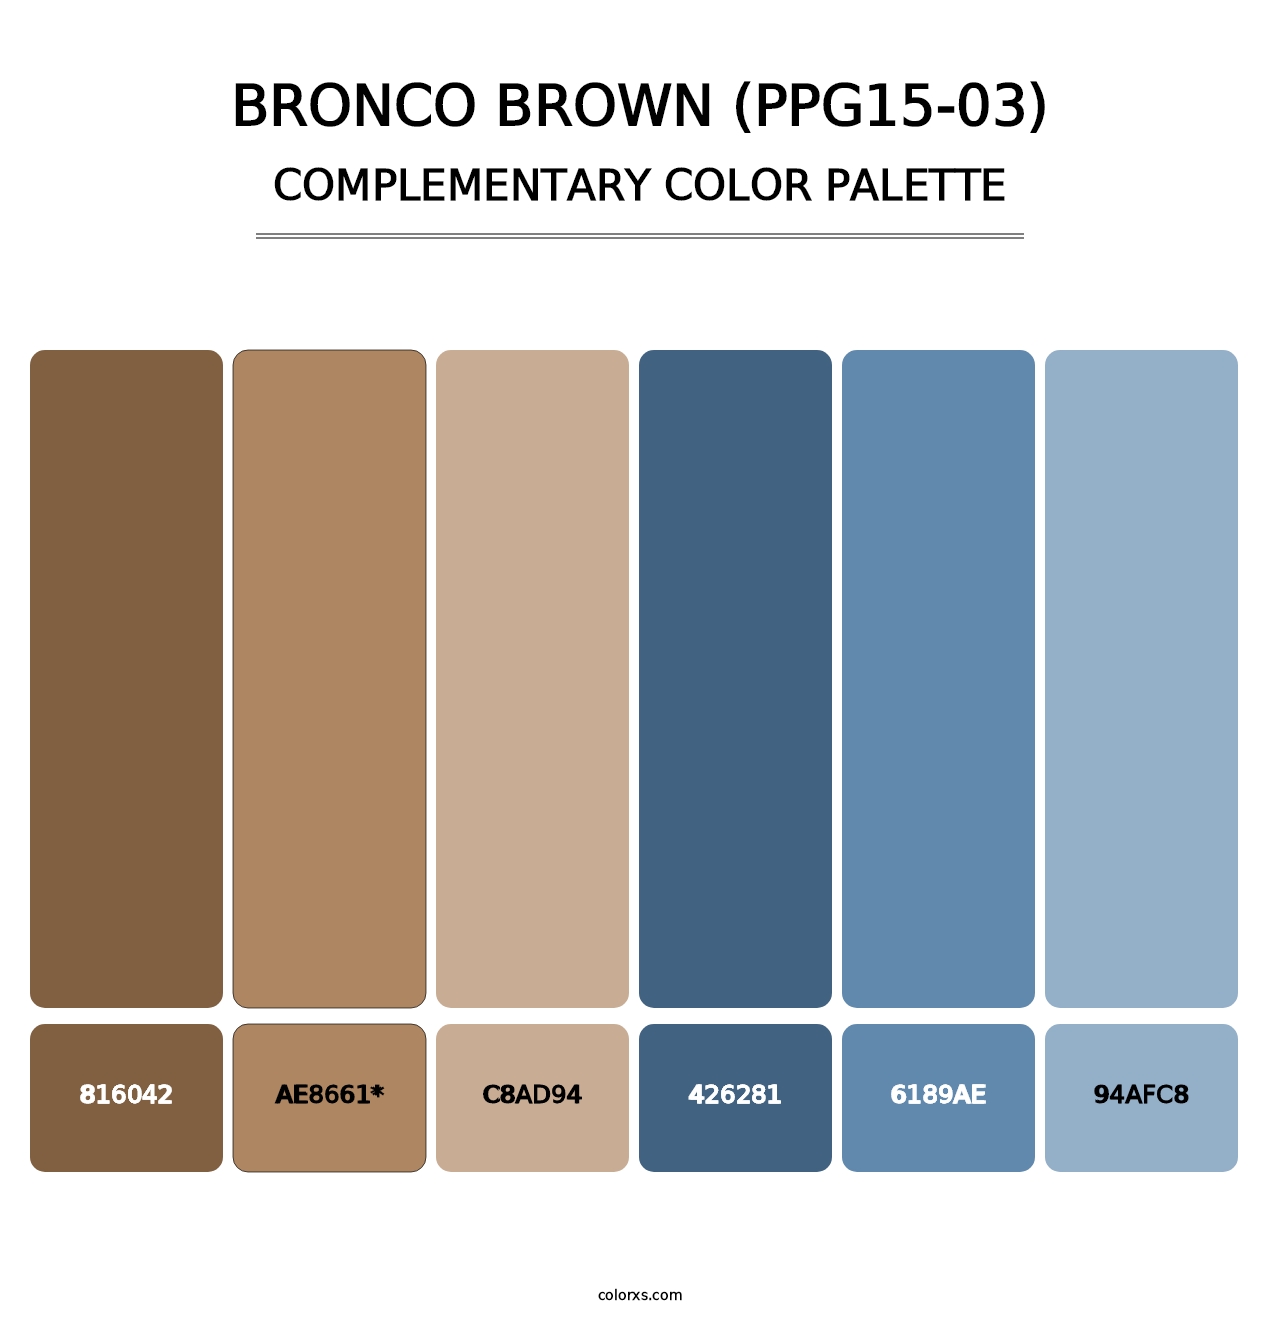 Bronco Brown (PPG15-03) - Complementary Color Palette